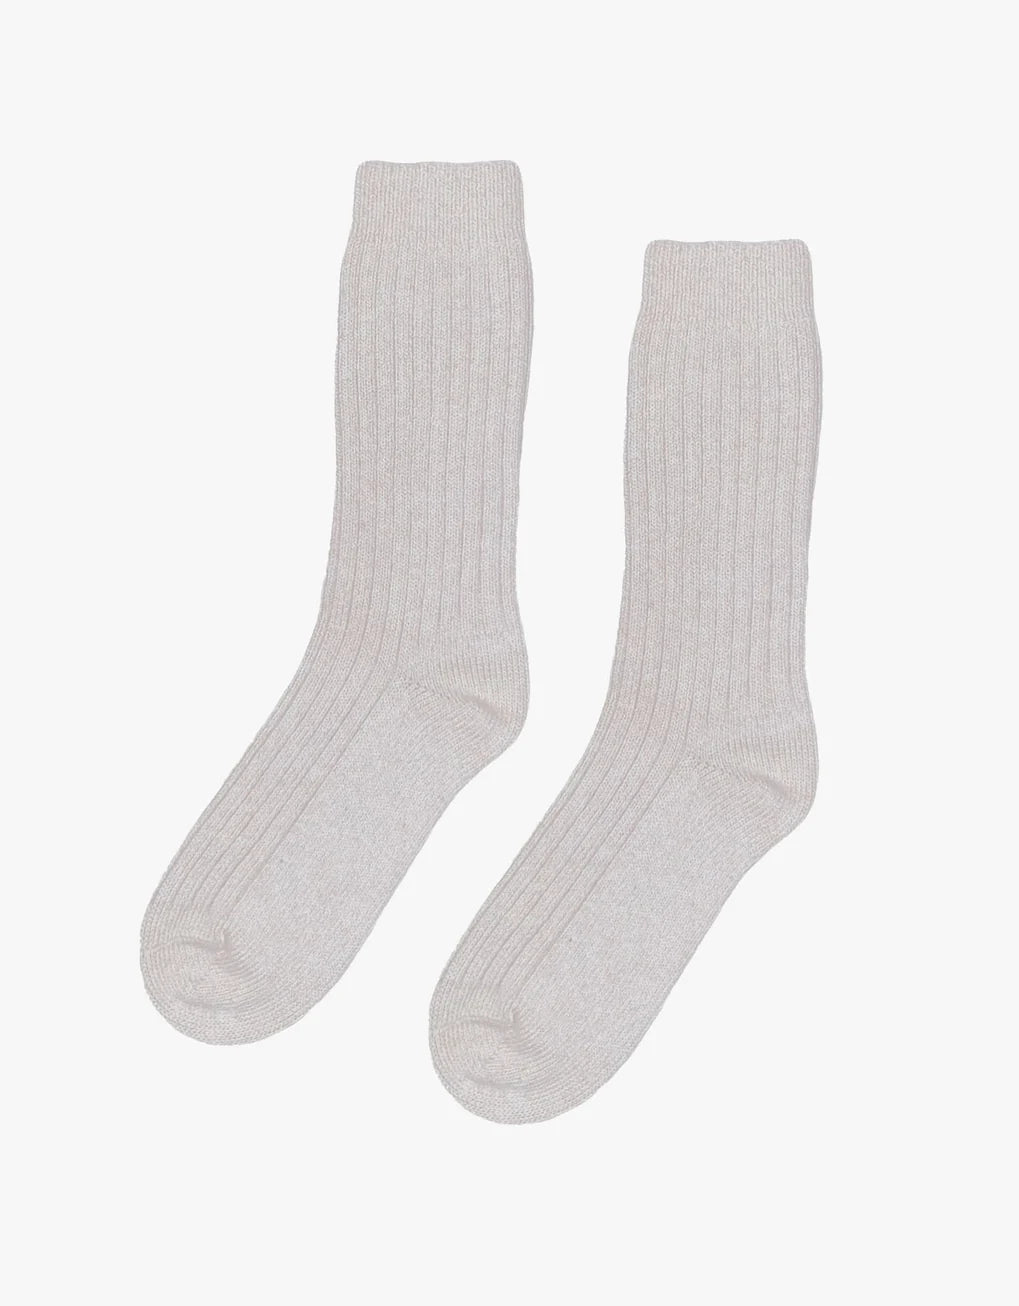 A pair of Colorful Standard Merino Wool Blend Socks made from recycled fibres.